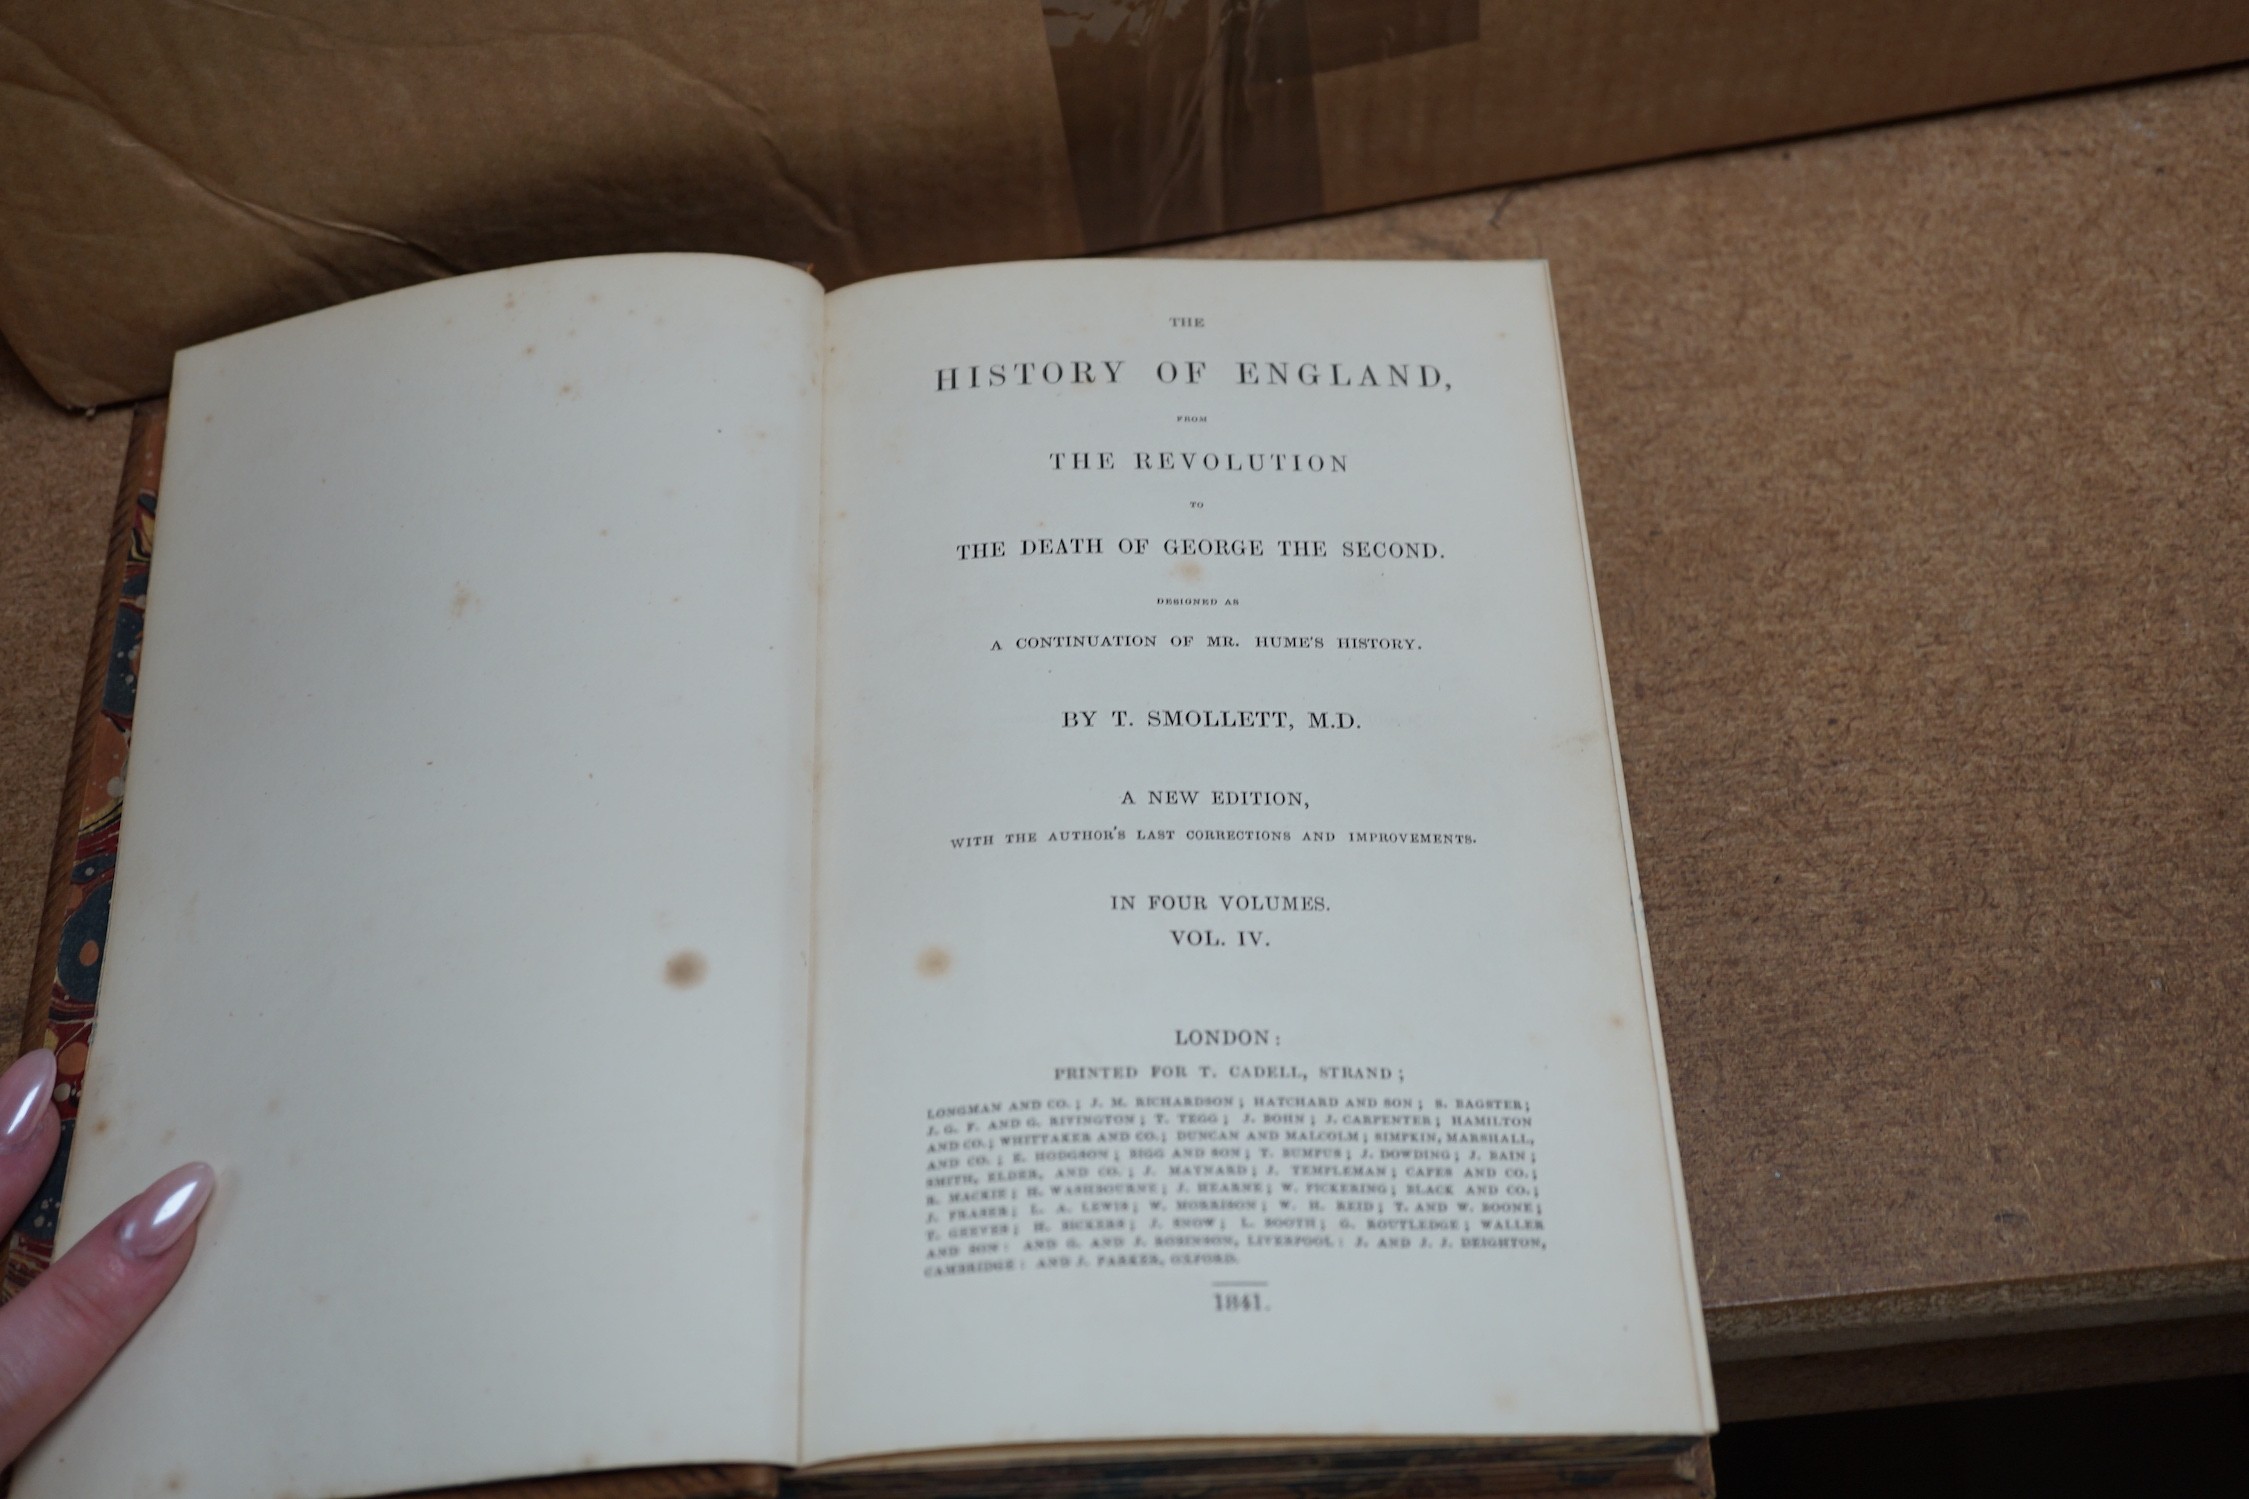 Hume, David - The History of England ... new edition, 6 vols. portrait frontis.; together with Smollet, Thomas - The History of England ... designed as a continuation of Mr Hume's History.